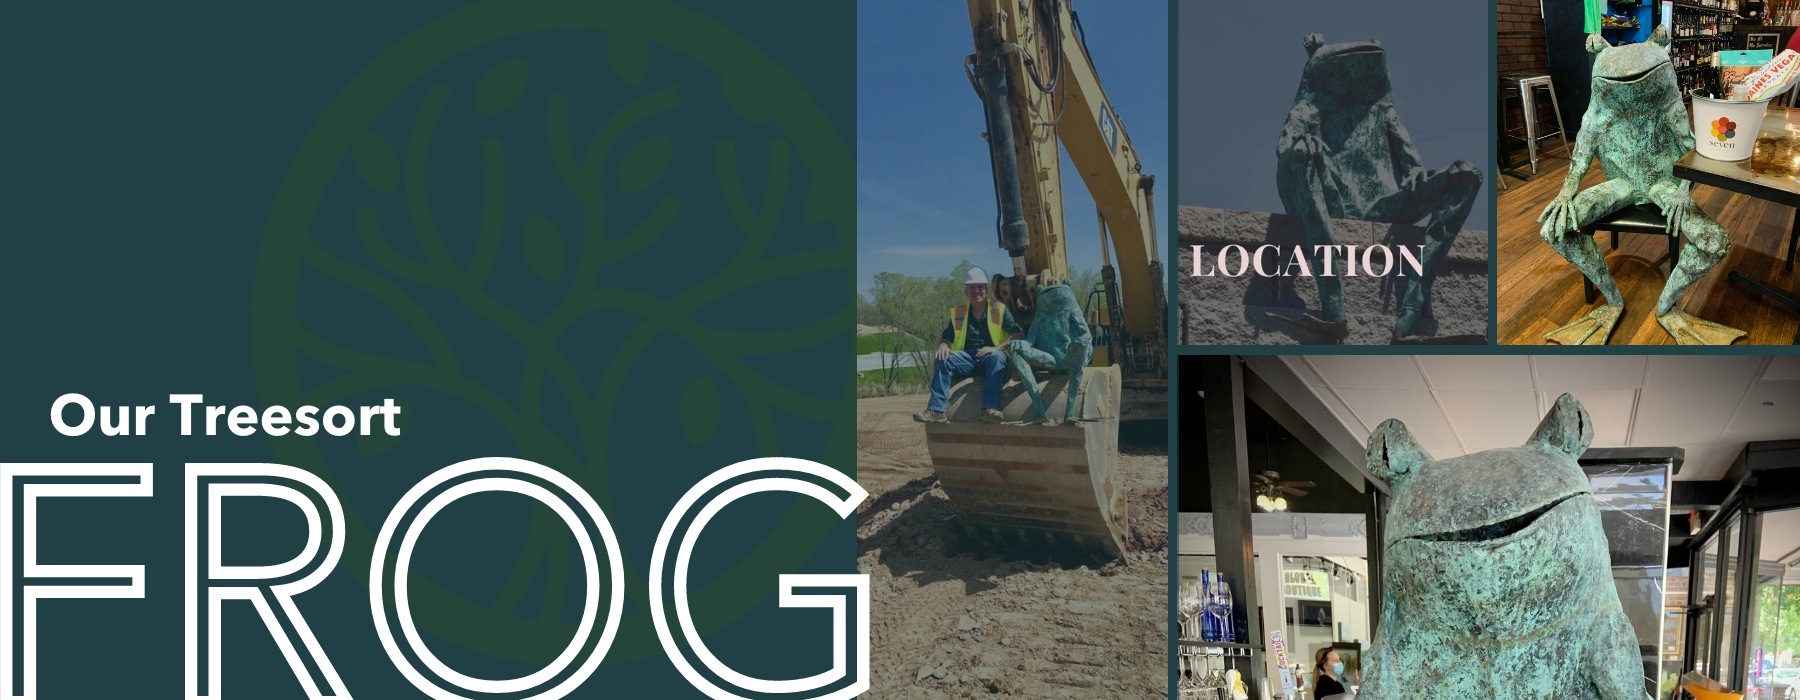 collage of colorful construction photos and the property's green frog statue